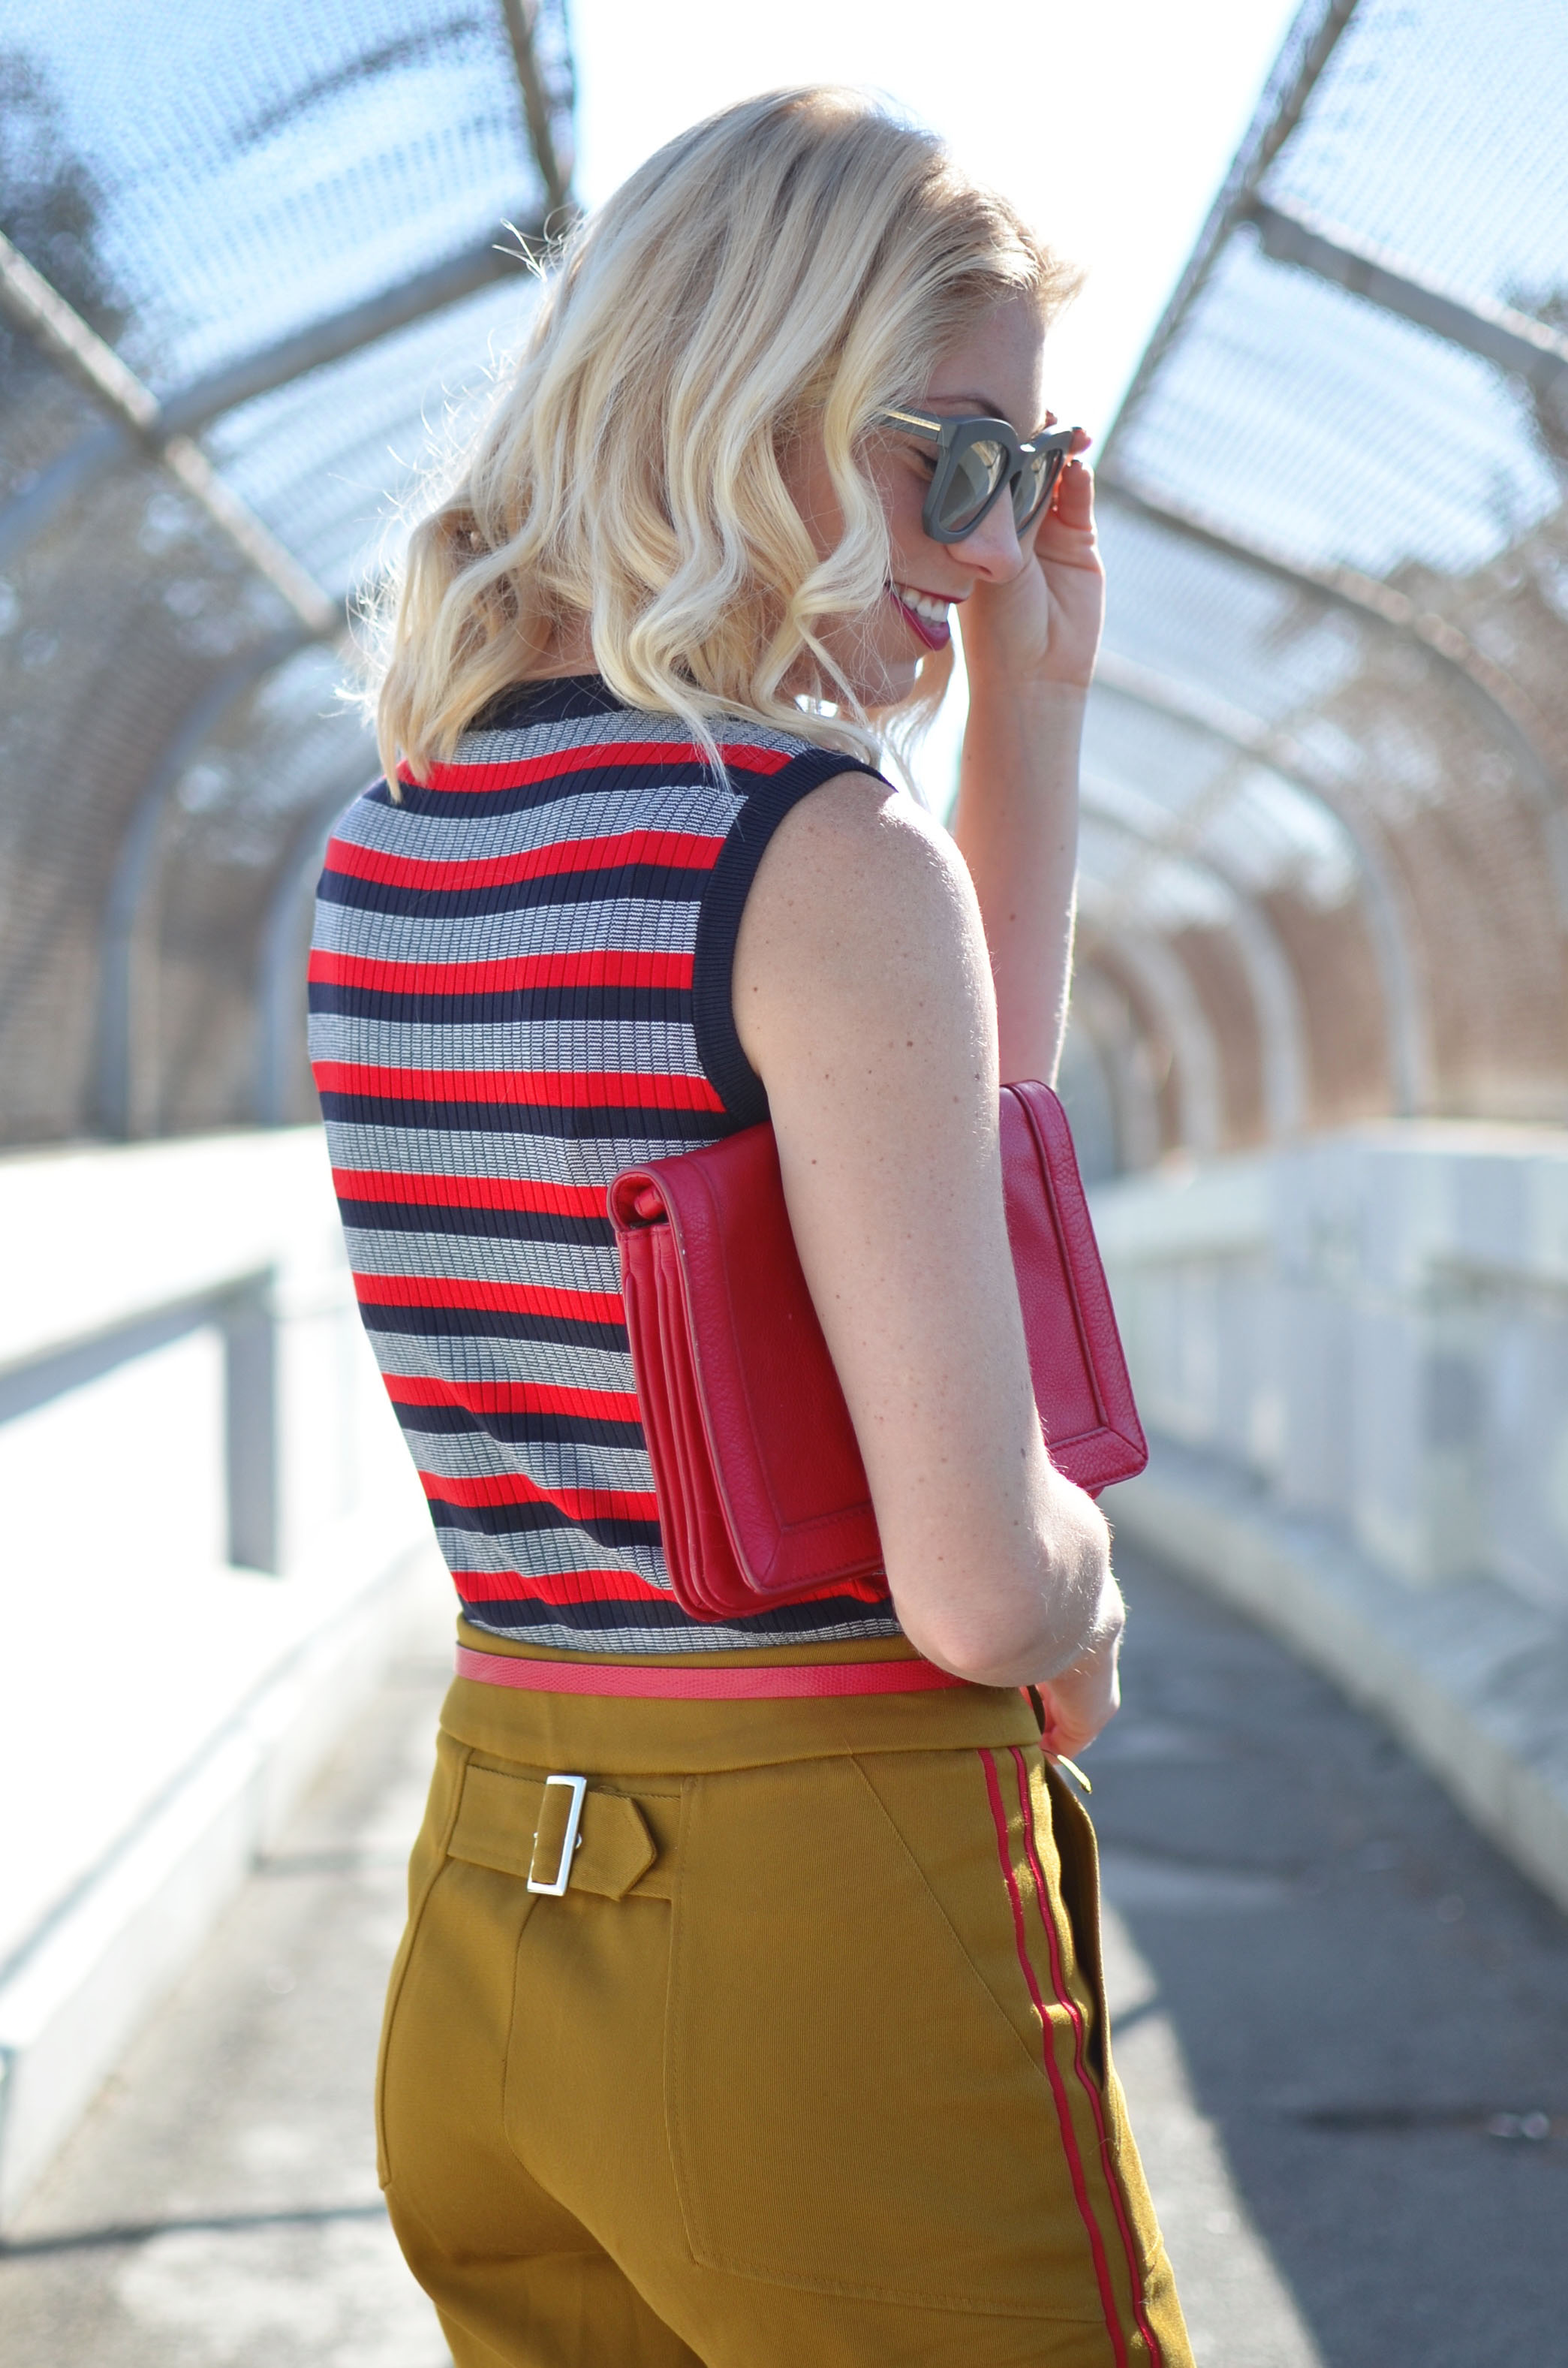 Stefanie of The Style Safari wears a military casual outfit with striped knit tank and pops of red heels and clutch